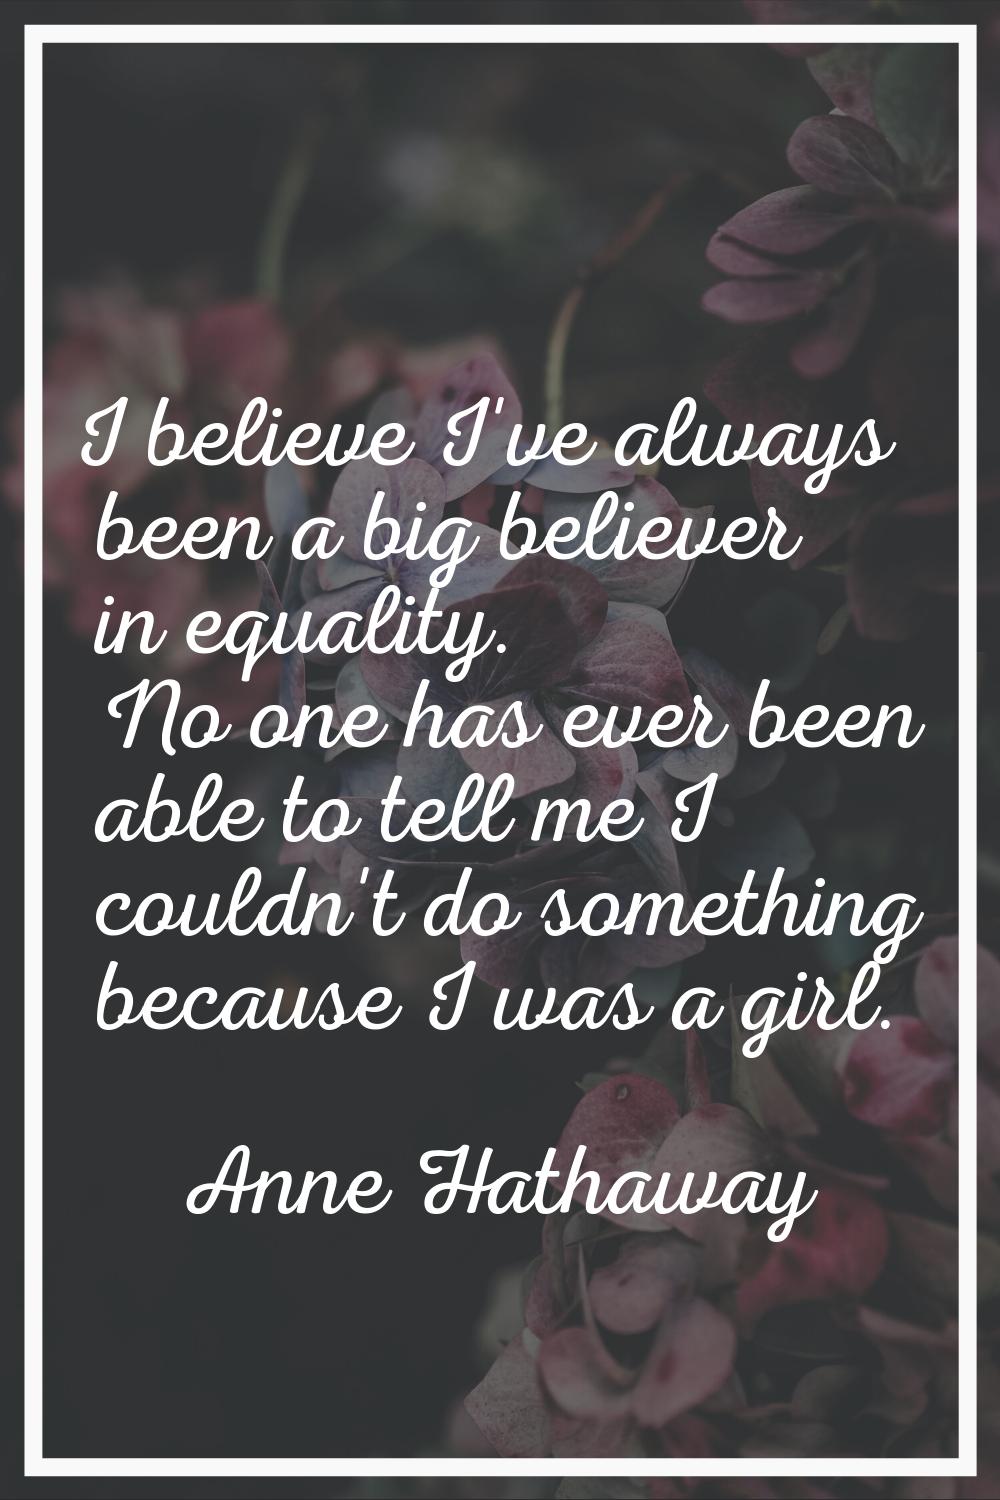 I believe I've always been a big believer in equality. No one has ever been able to tell me I could